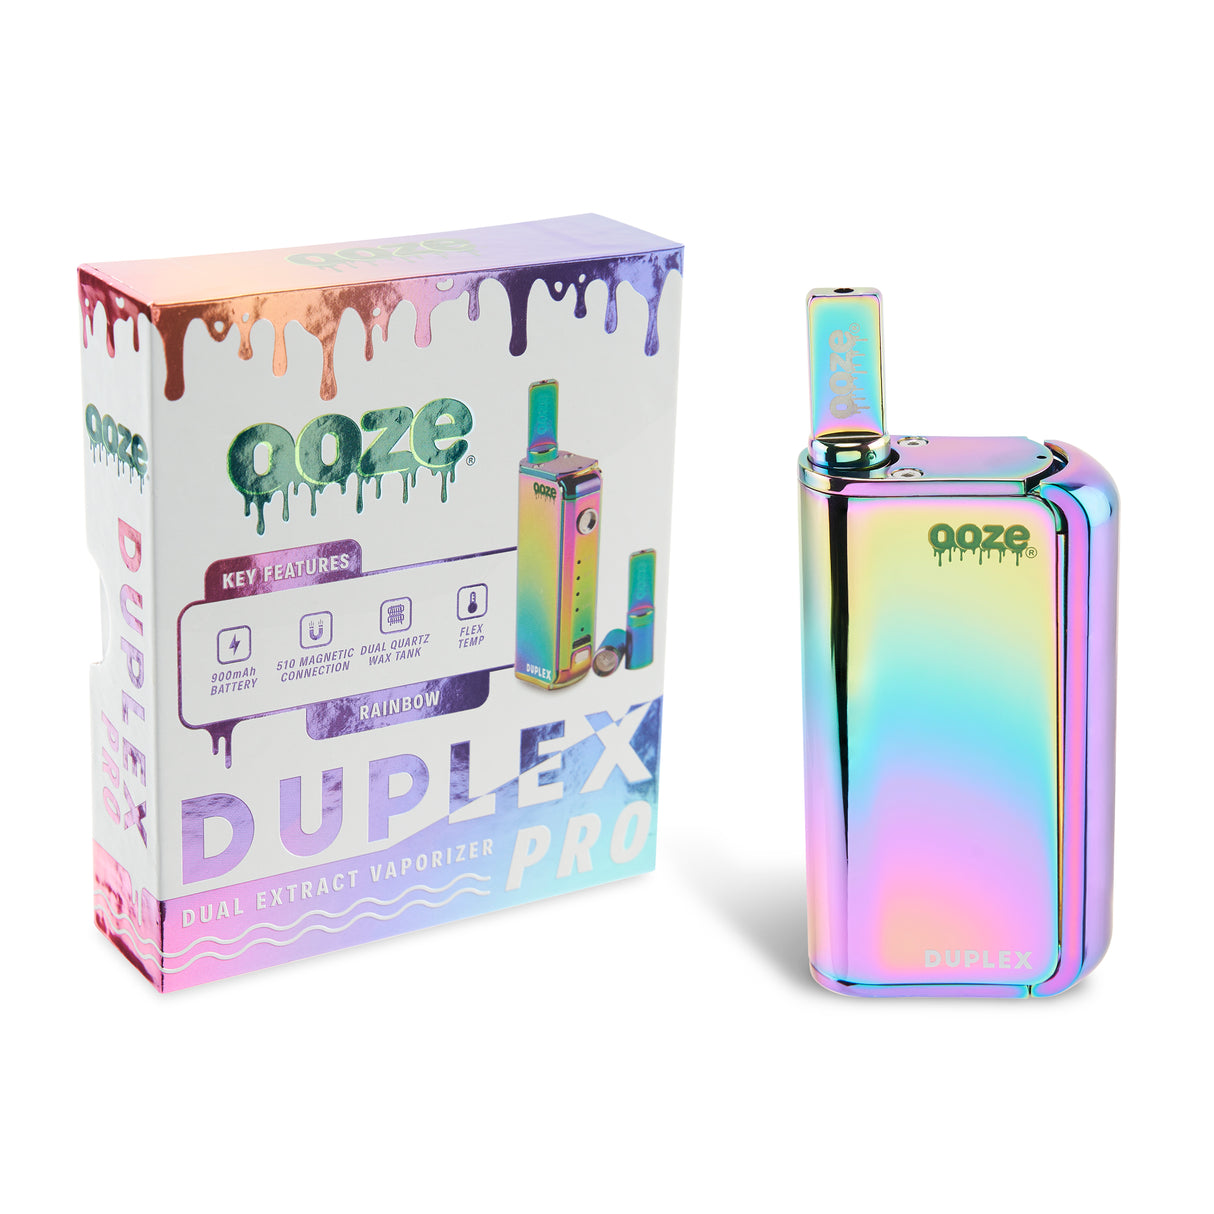 The Rainbow Ooze Duplex Pro Vaporizer is shown next to the packaging with the wax atomizer inserted